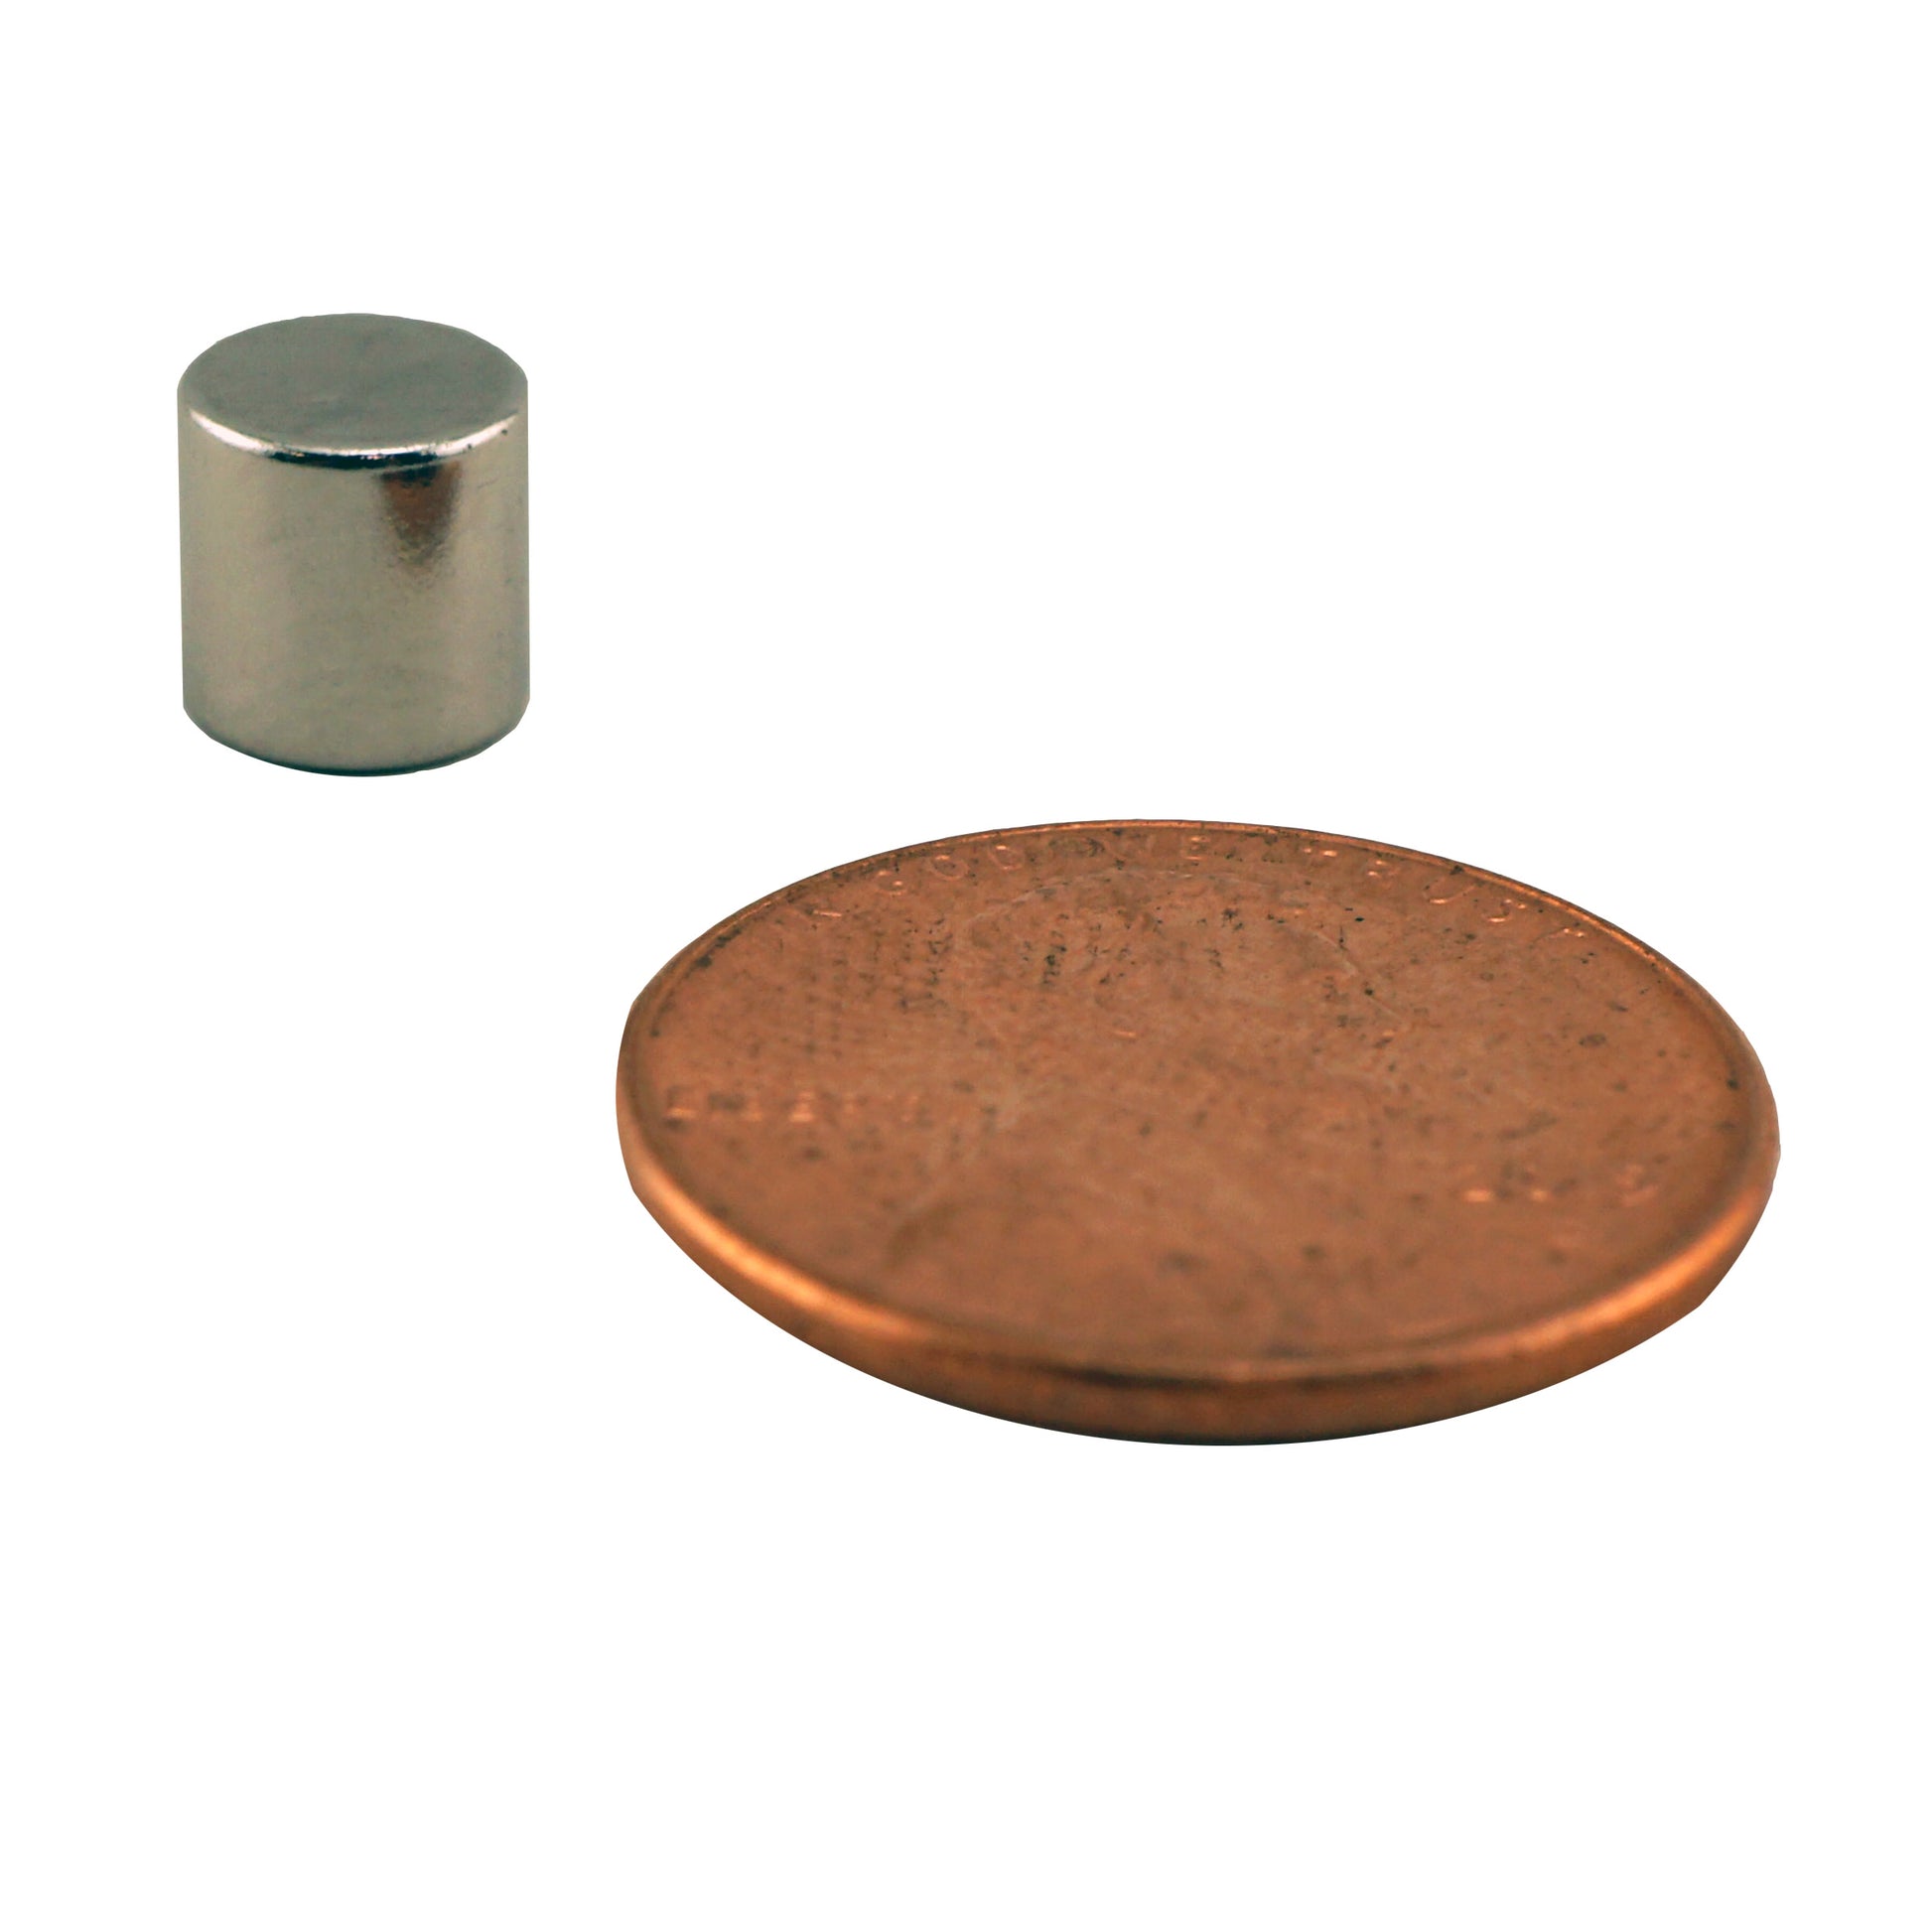 Load image into Gallery viewer, ND002543N Neodymium Disc Magnet - Compared to Penny for Size Reference